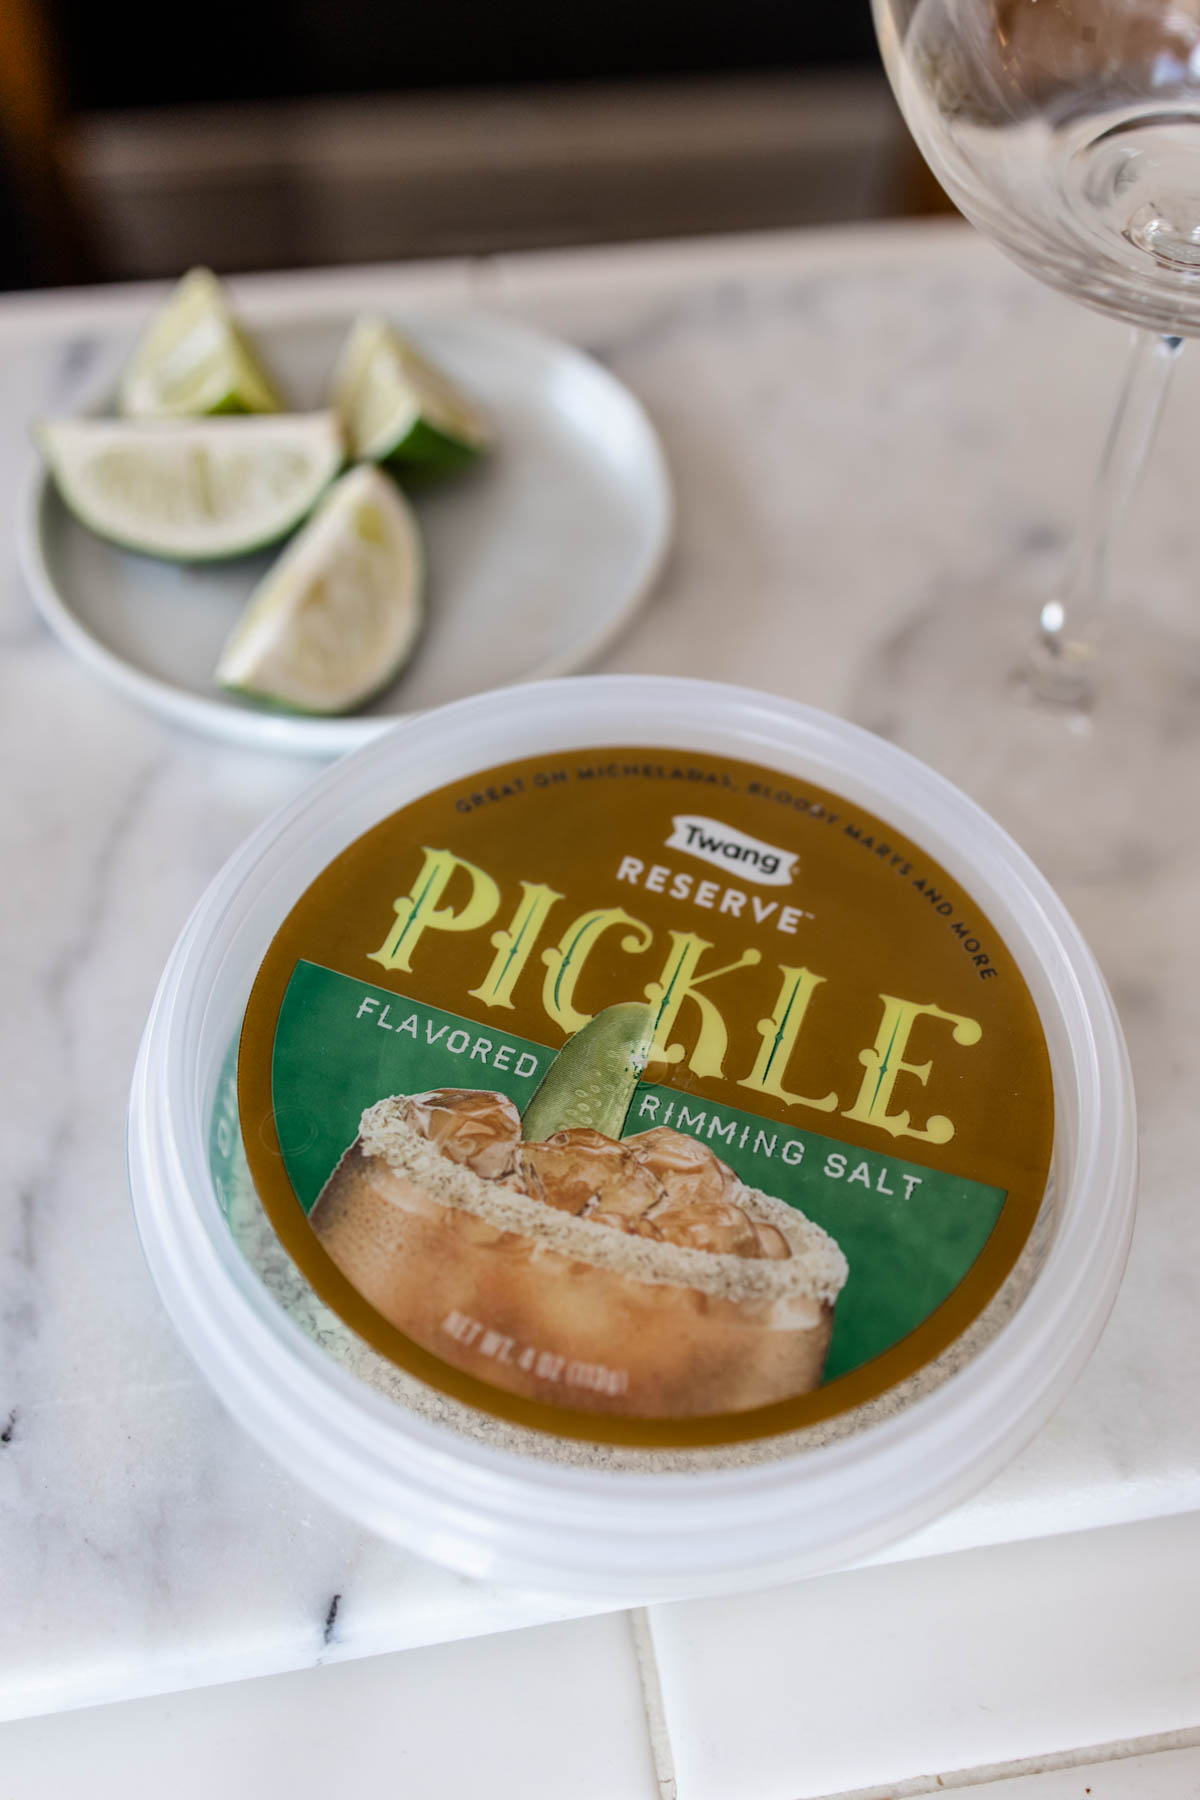 A container of Twang Reserve Pickle Flavored Rimming Salt with a plate of lime wedges behind it on a counter.